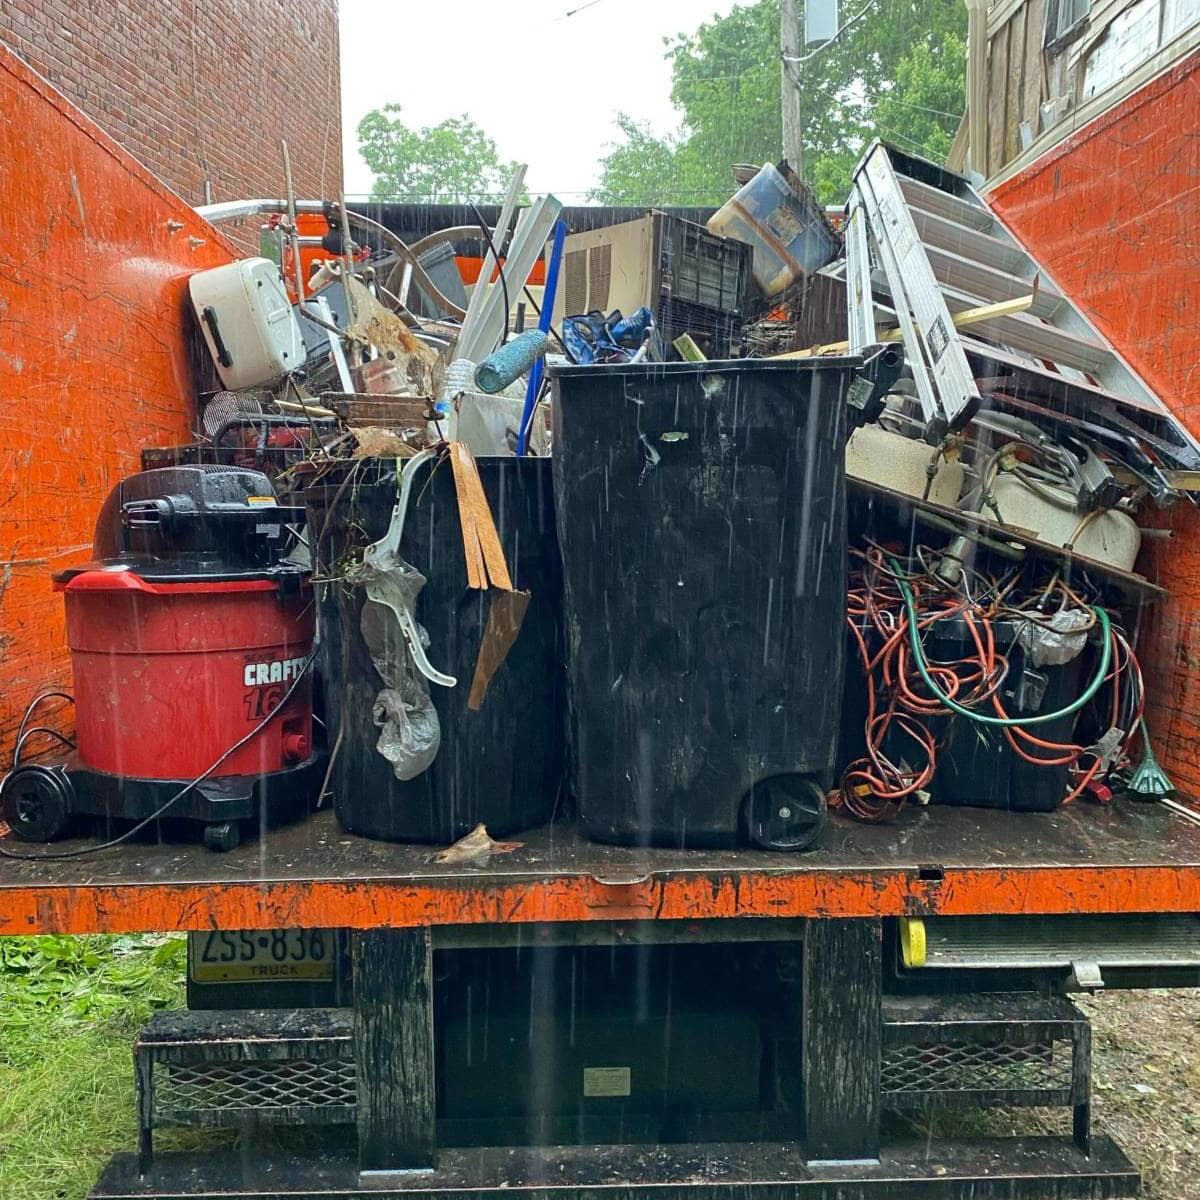 junk collected in orange trunk while raining